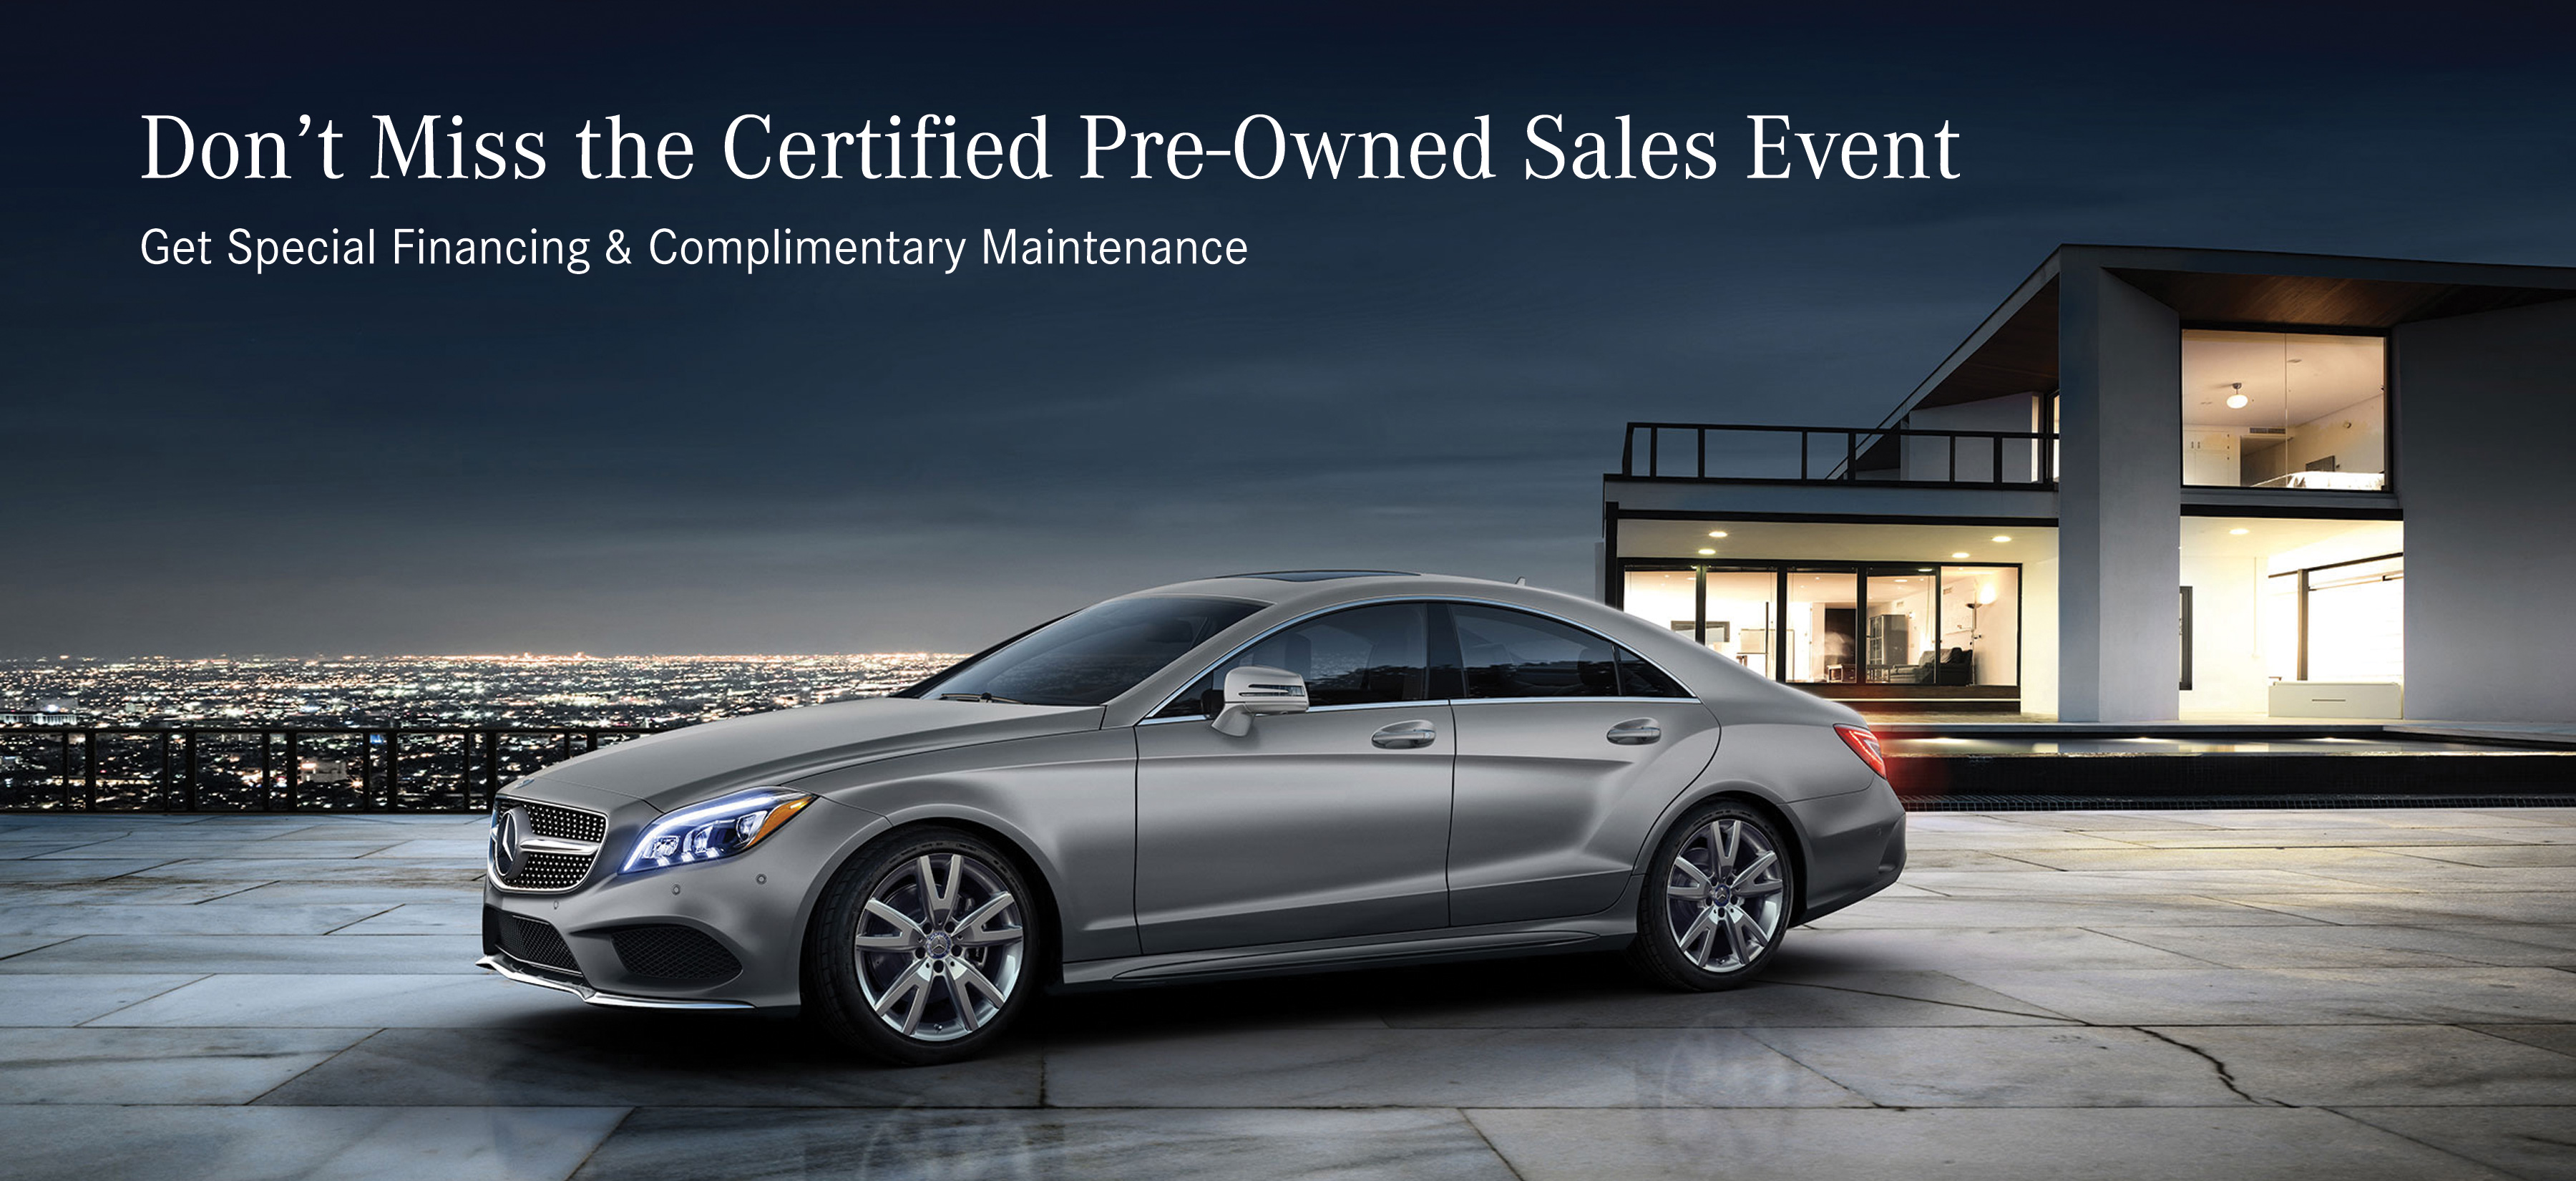 Don't Miss the Certified Pre-Owned Sales Event